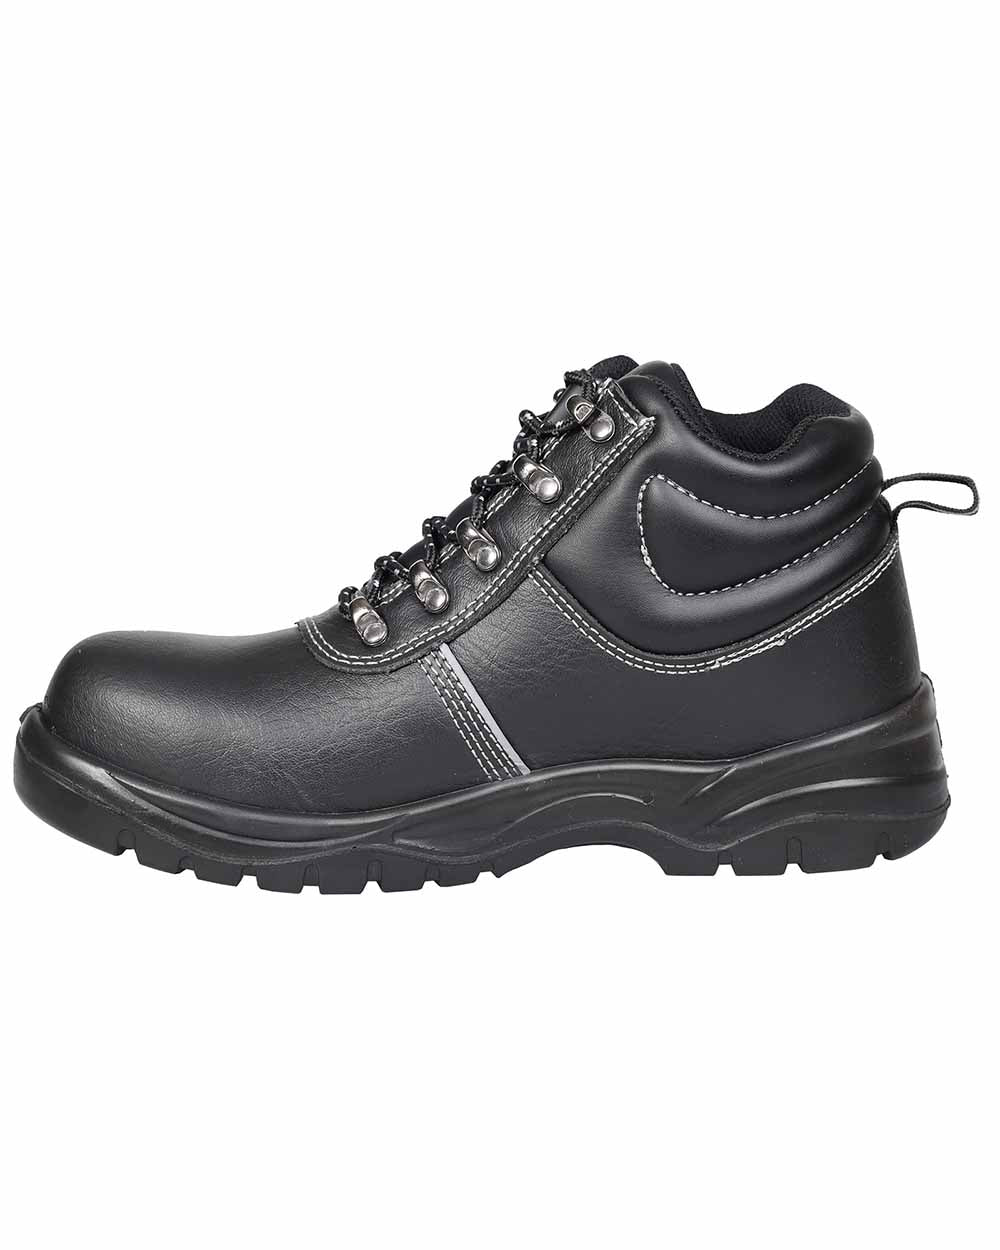 Black coloured Fort Workforce Safety Boots on white background 